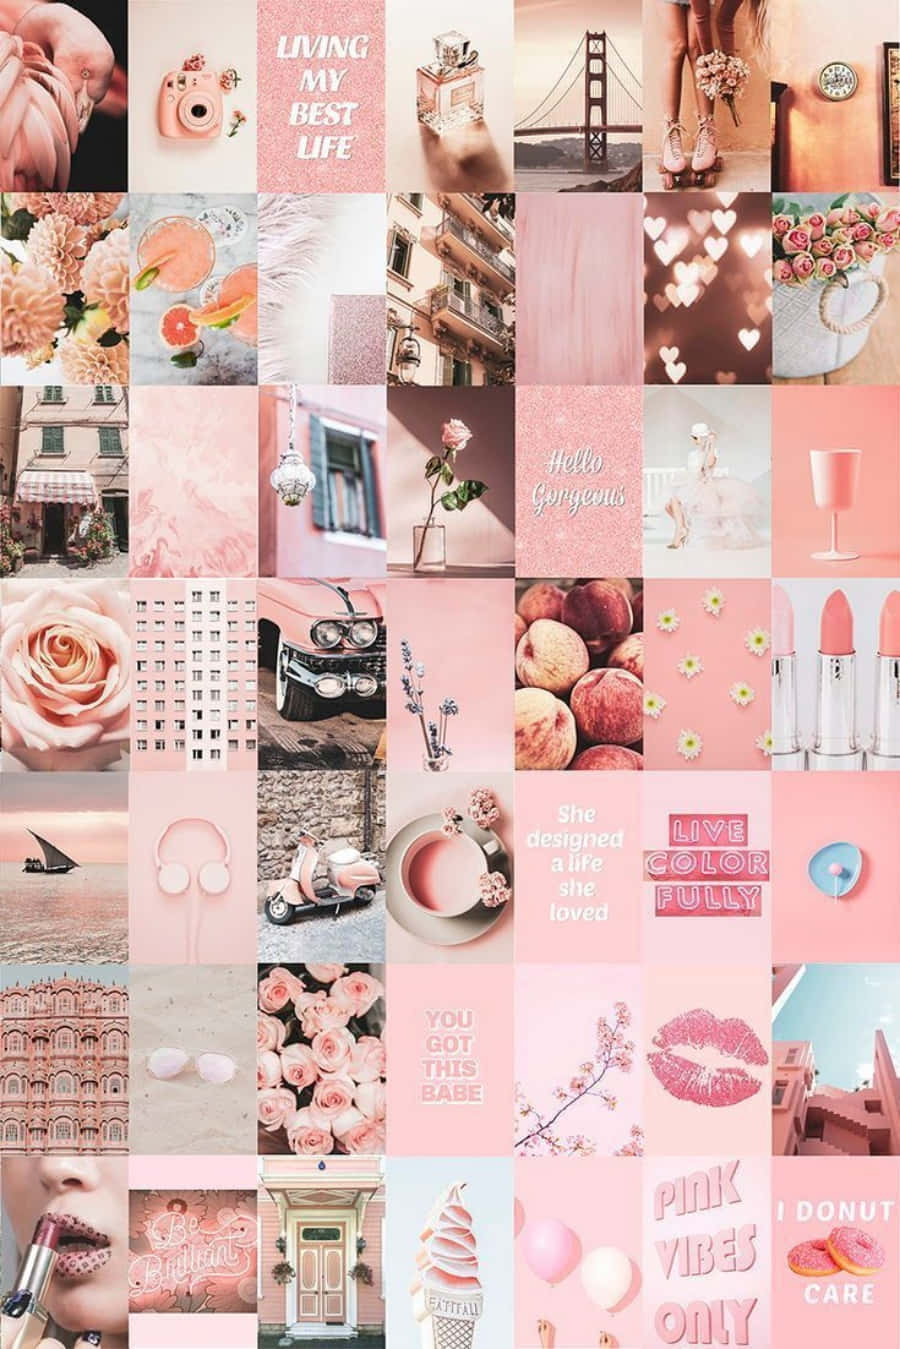 Enjoy this beautiful aesthetic pink collage to bring a little extra color and style to your world. Wallpaper